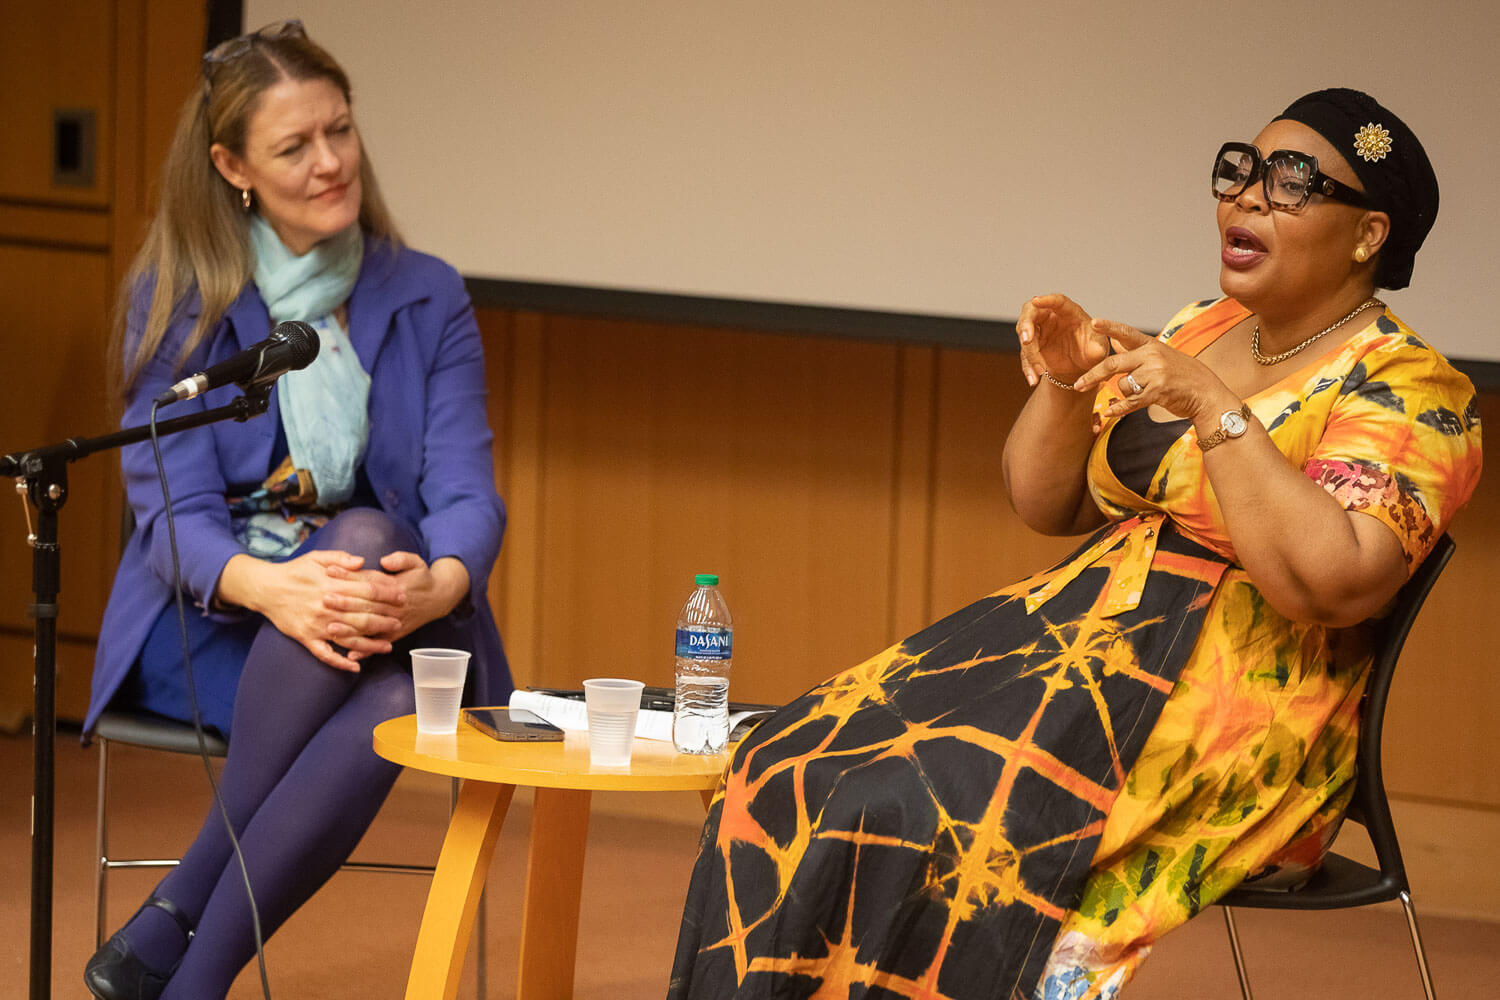 Leymah Roberta Gbowee, 2011 Nobel Peace Prize laureate, joined President Michelle J. Anderson for a special lecture in the Woody Tanger Auditorium in April. Gbowee helped lead the Women of Liberia Mass Action for Peace that worked to end the 14-year civil war in Liberia.